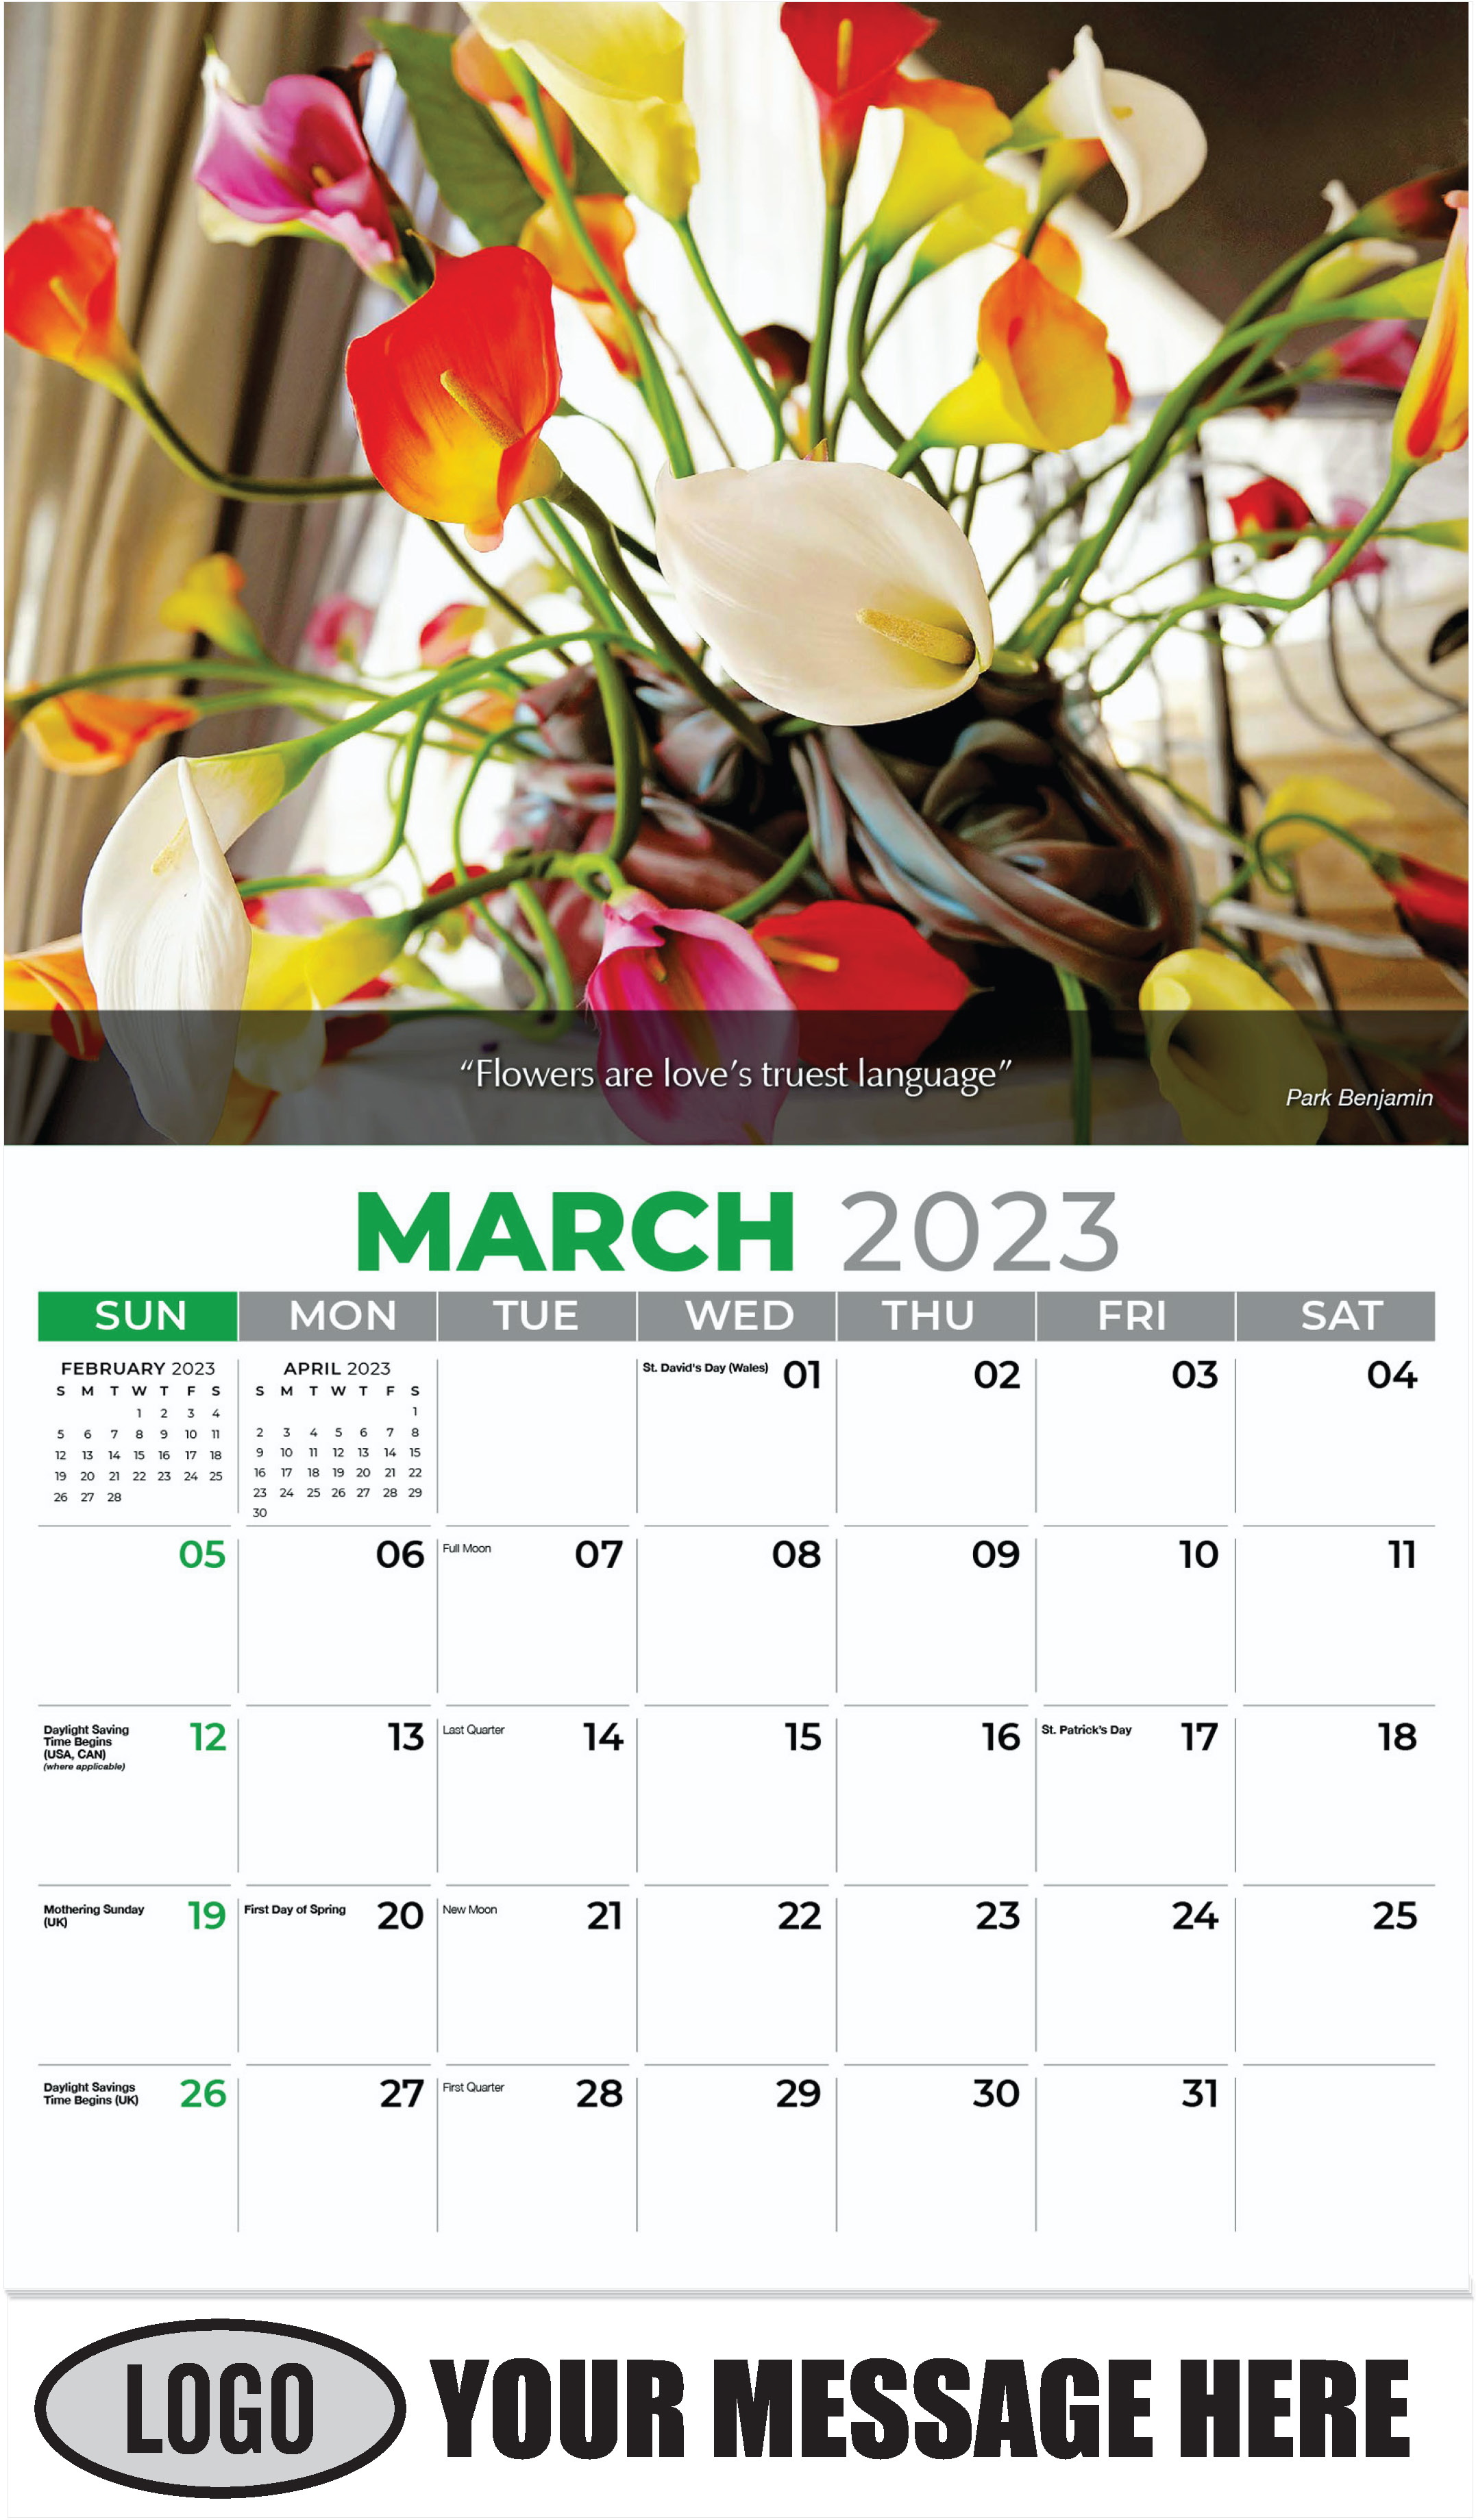 Pink & White Roses - March - Flowers & Gardens 2023 Promotional Calendar